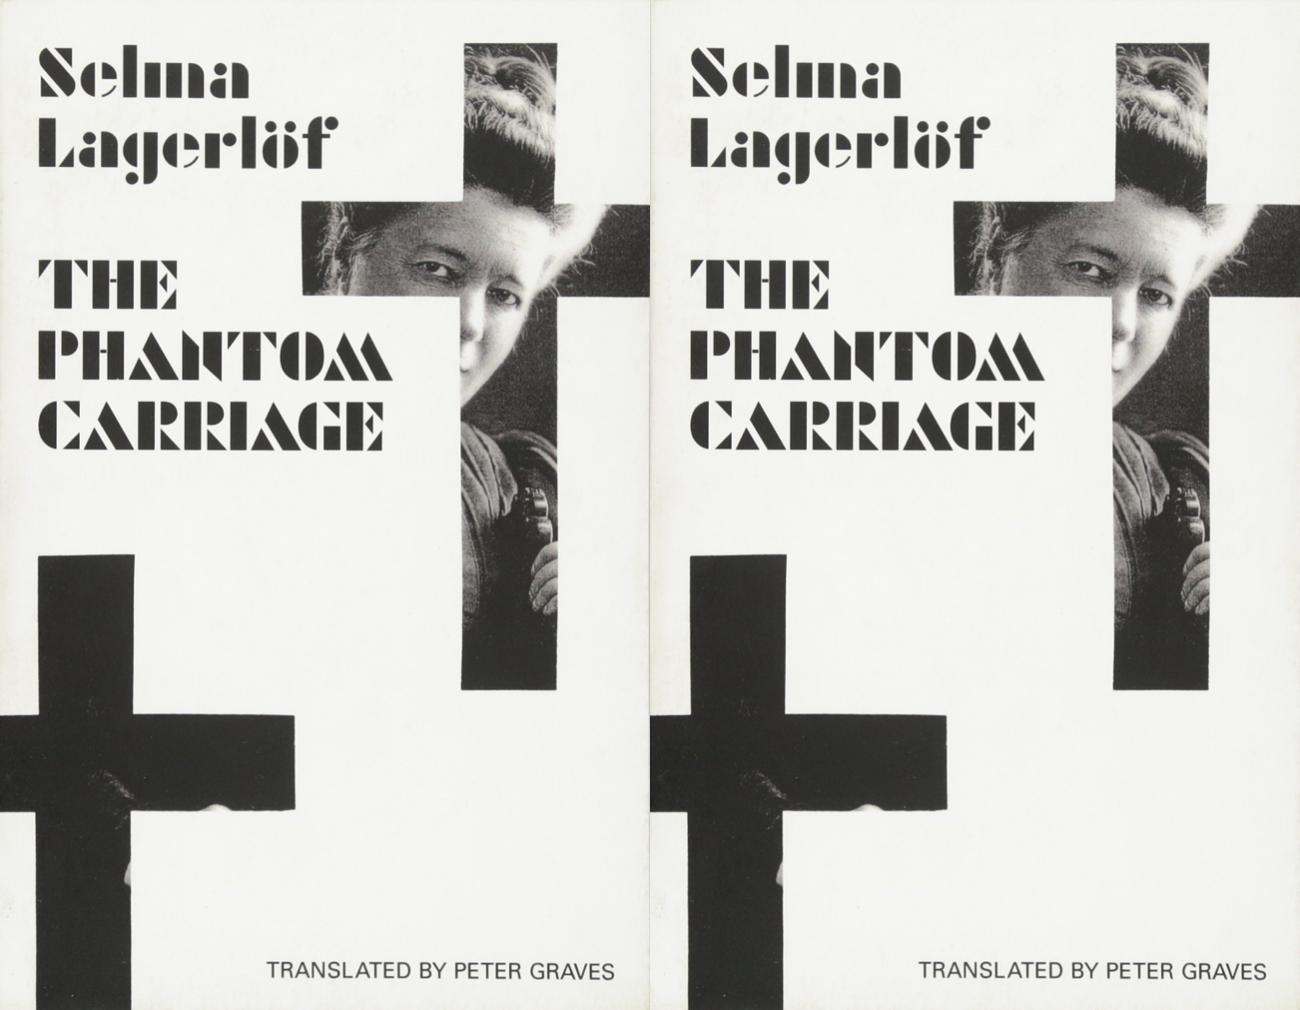 Cover art for The Phantom Carriage by Selma Lagerlof